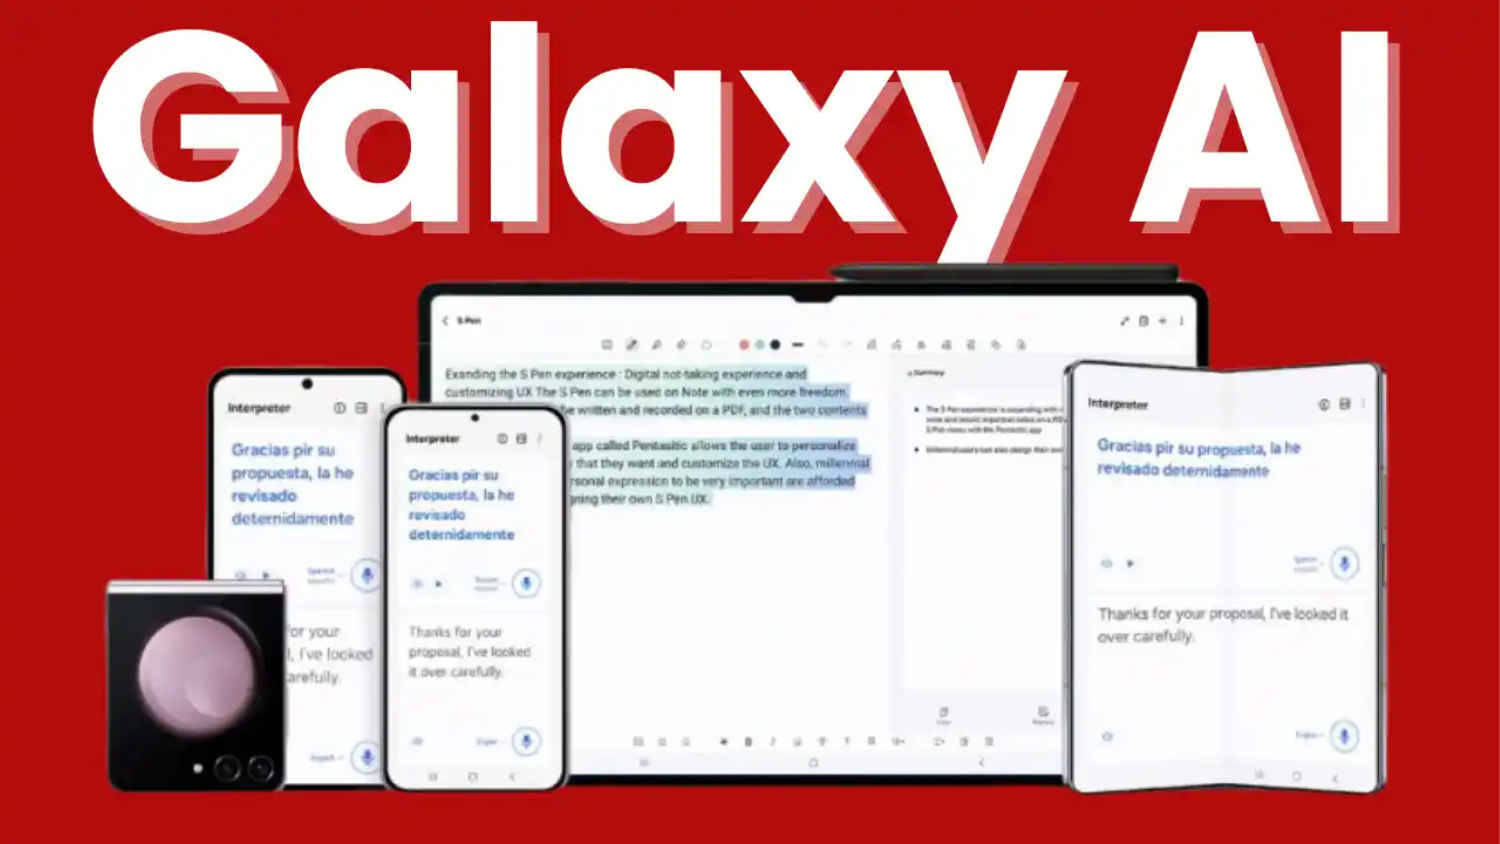 Samsung confirms that Galaxy AI is coming to more devices ‘soon’: Check details